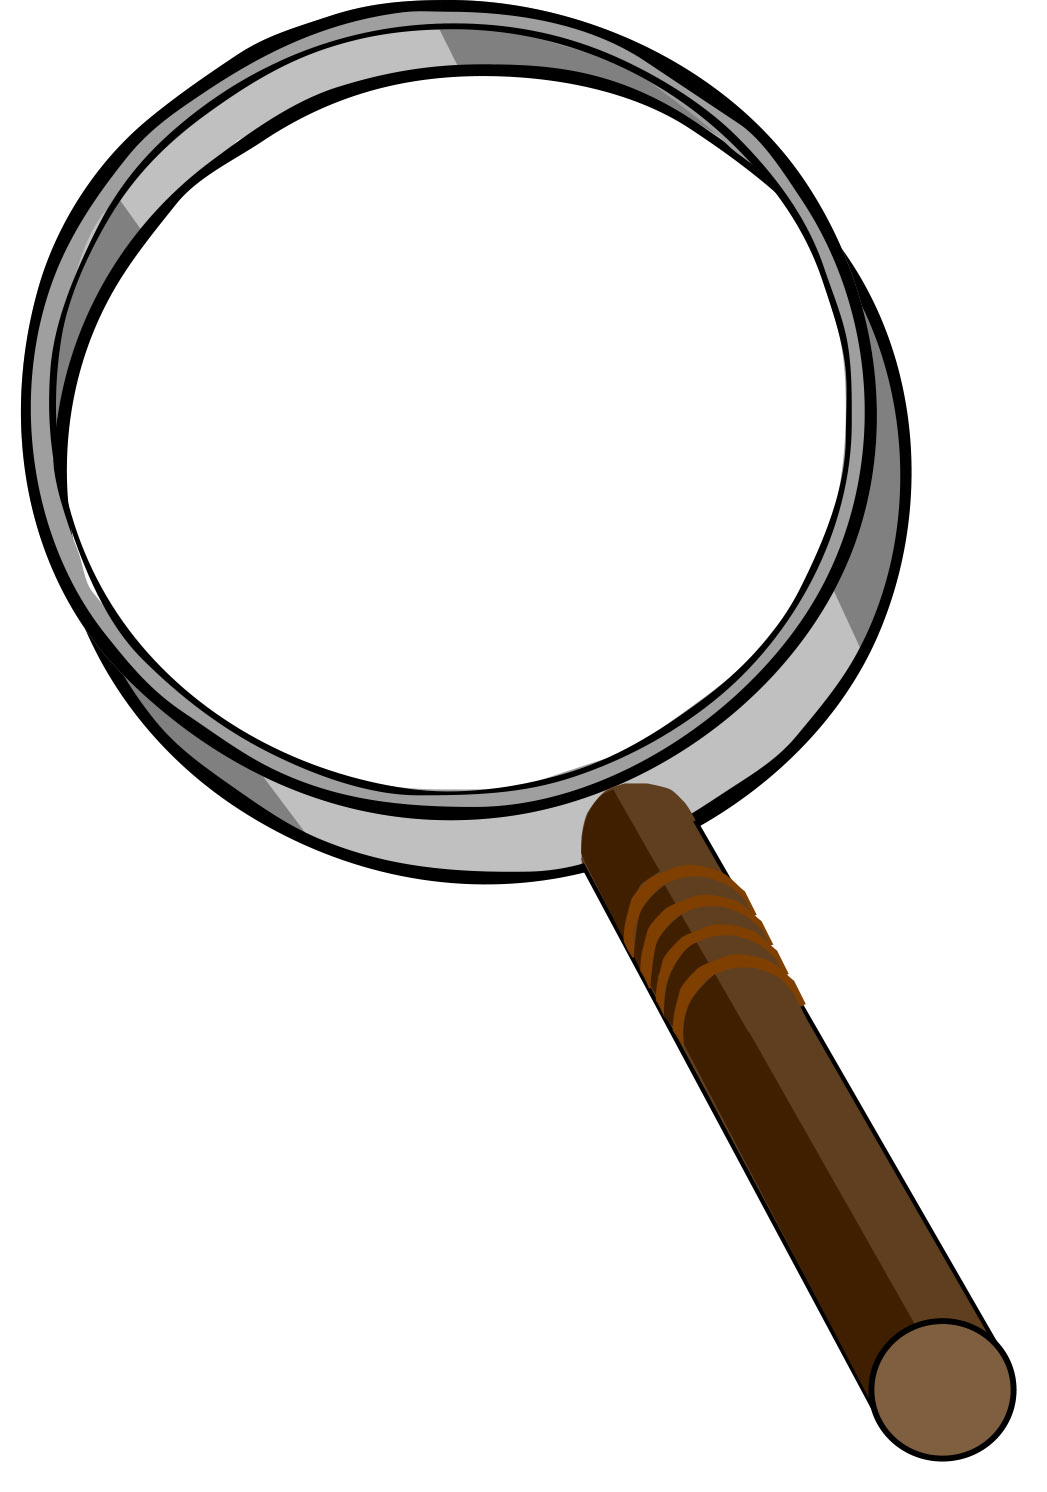 magnifying glass clipart black and white - photo #9